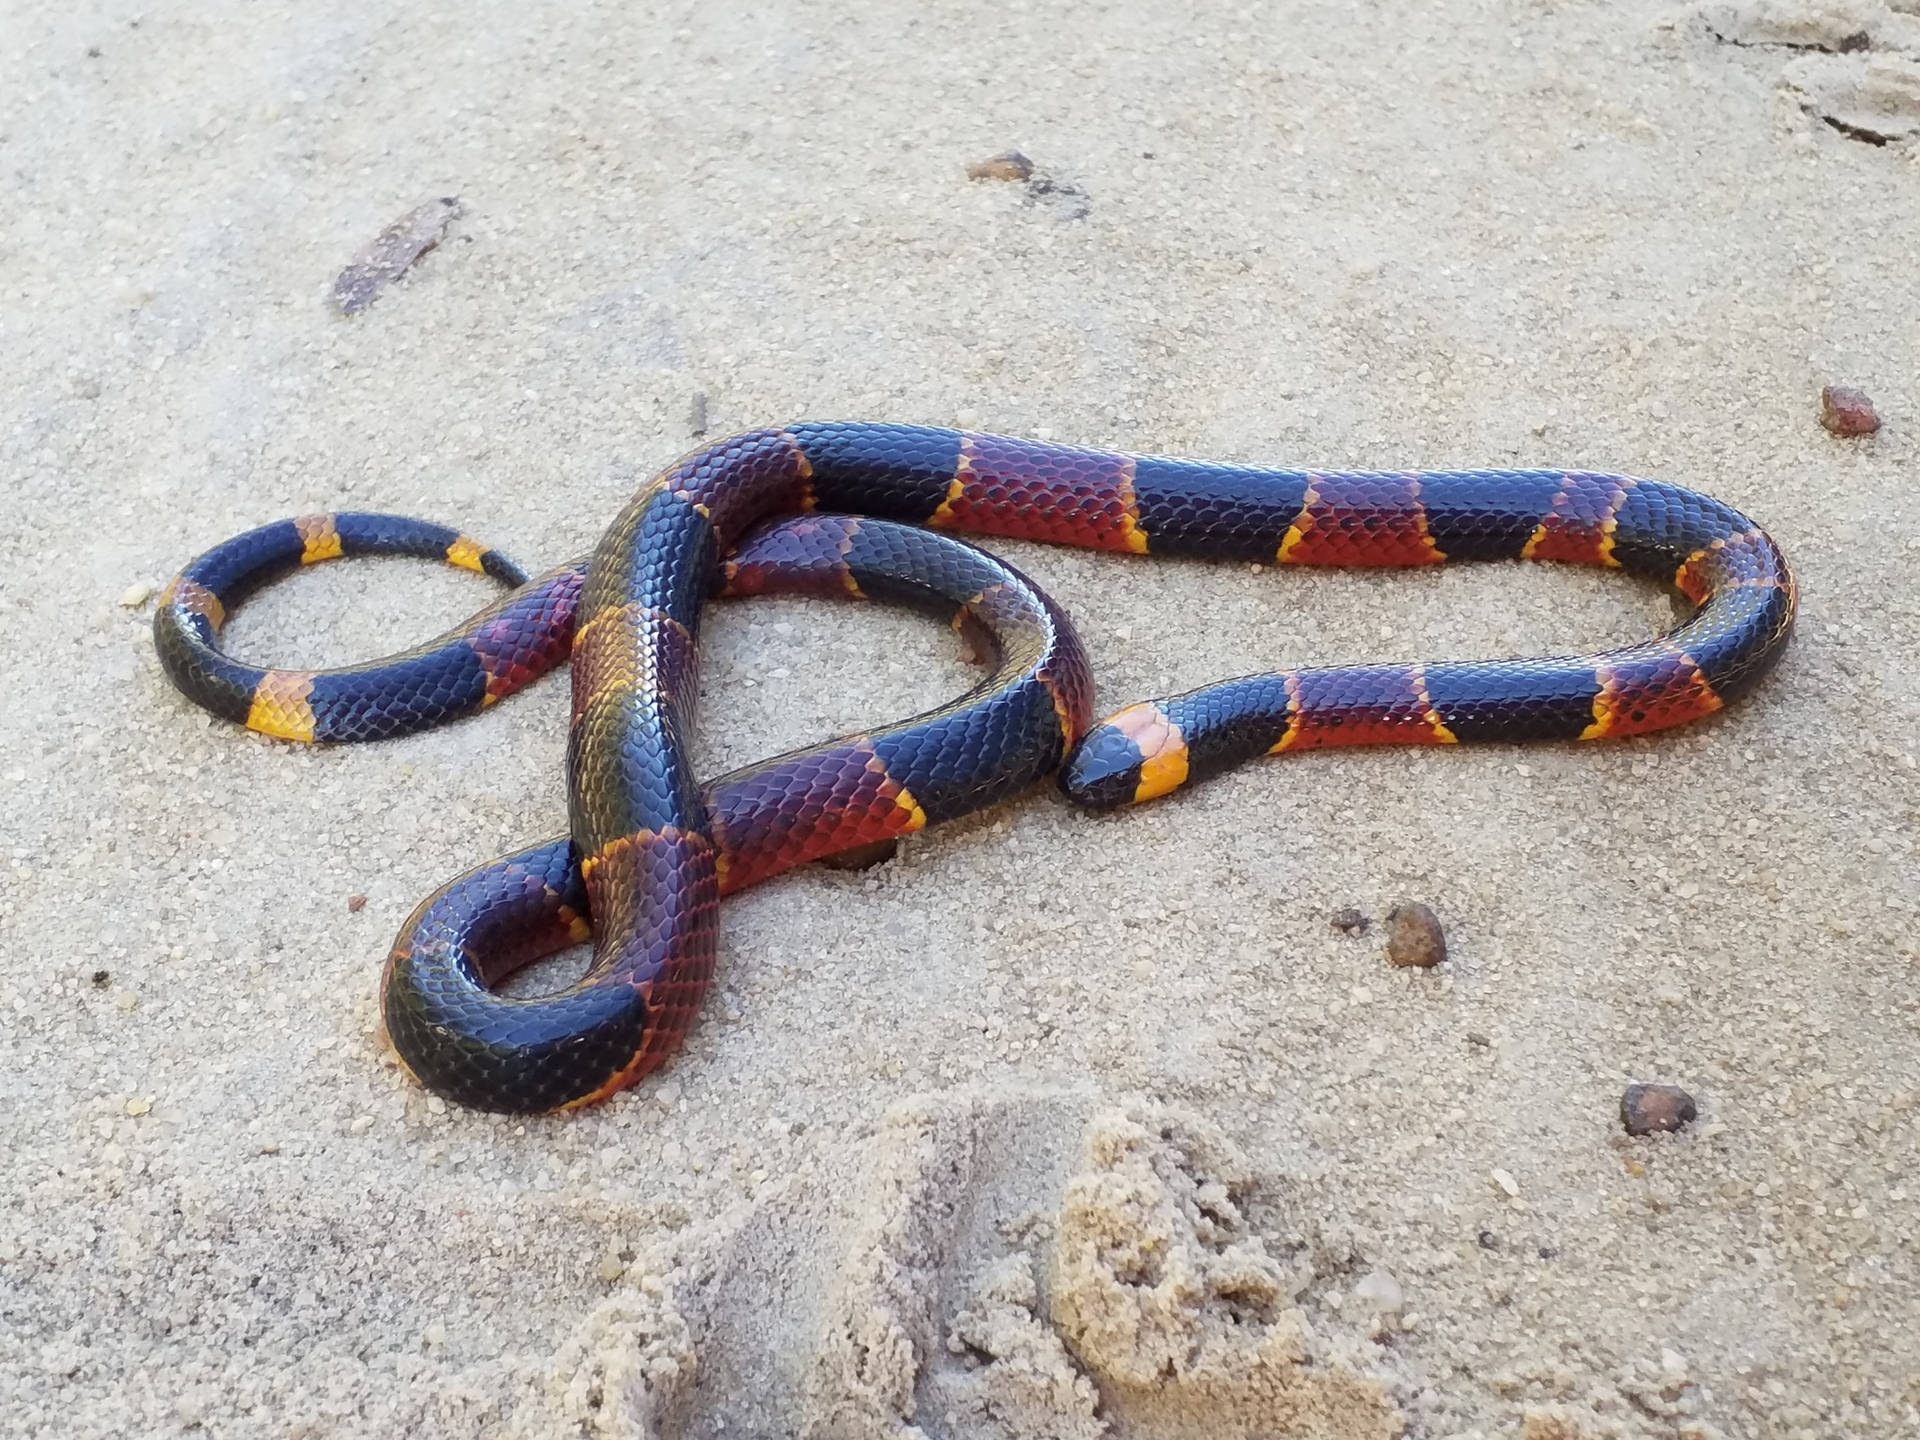 Texas Coral Snake Relaxing On Sand Wallpaper